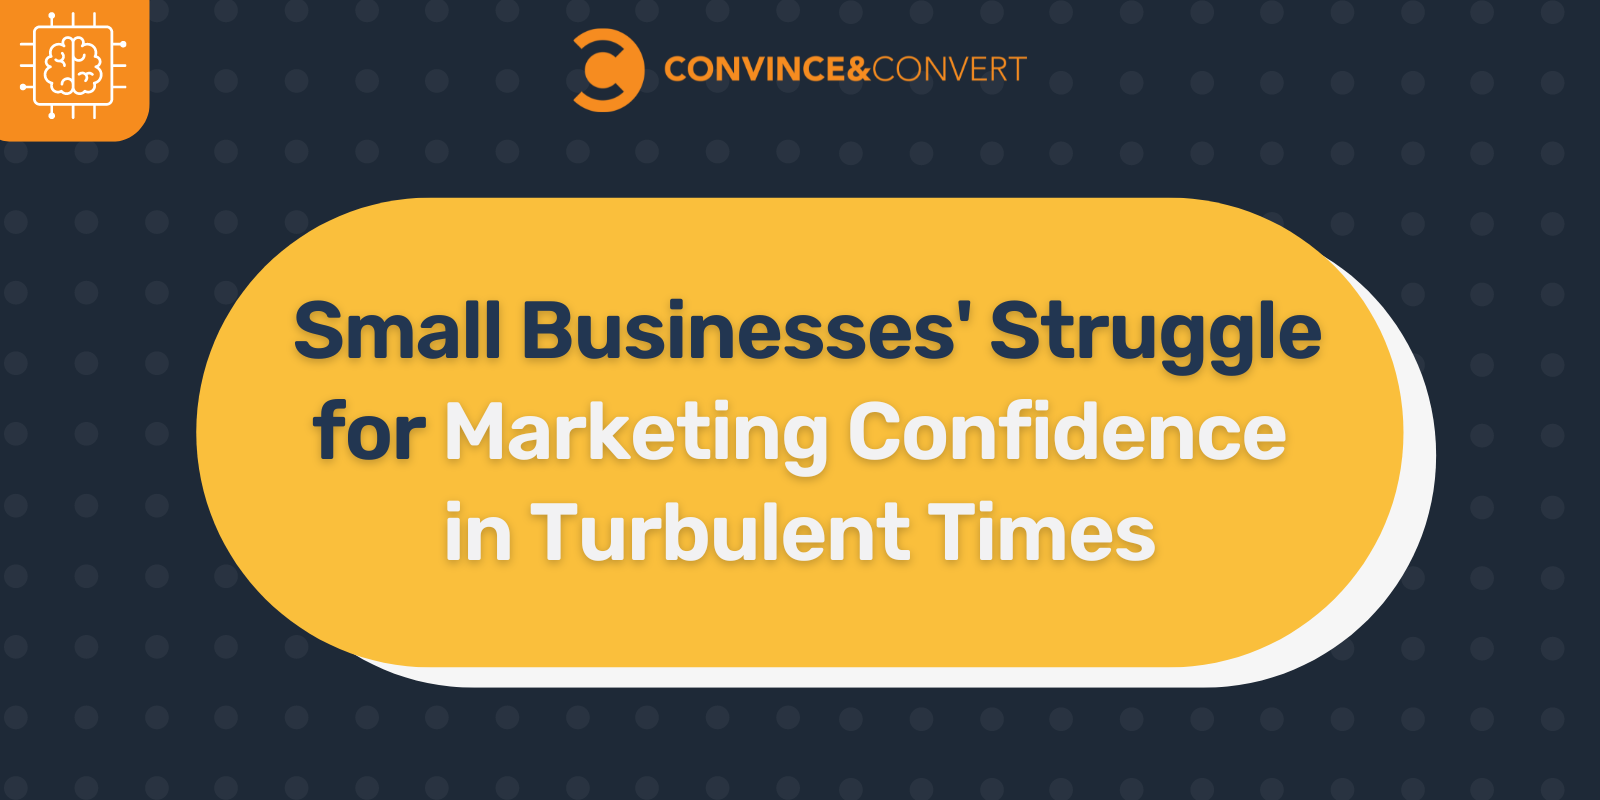 Small Business' Struggle for Marketing Confidence in Turbulent Times